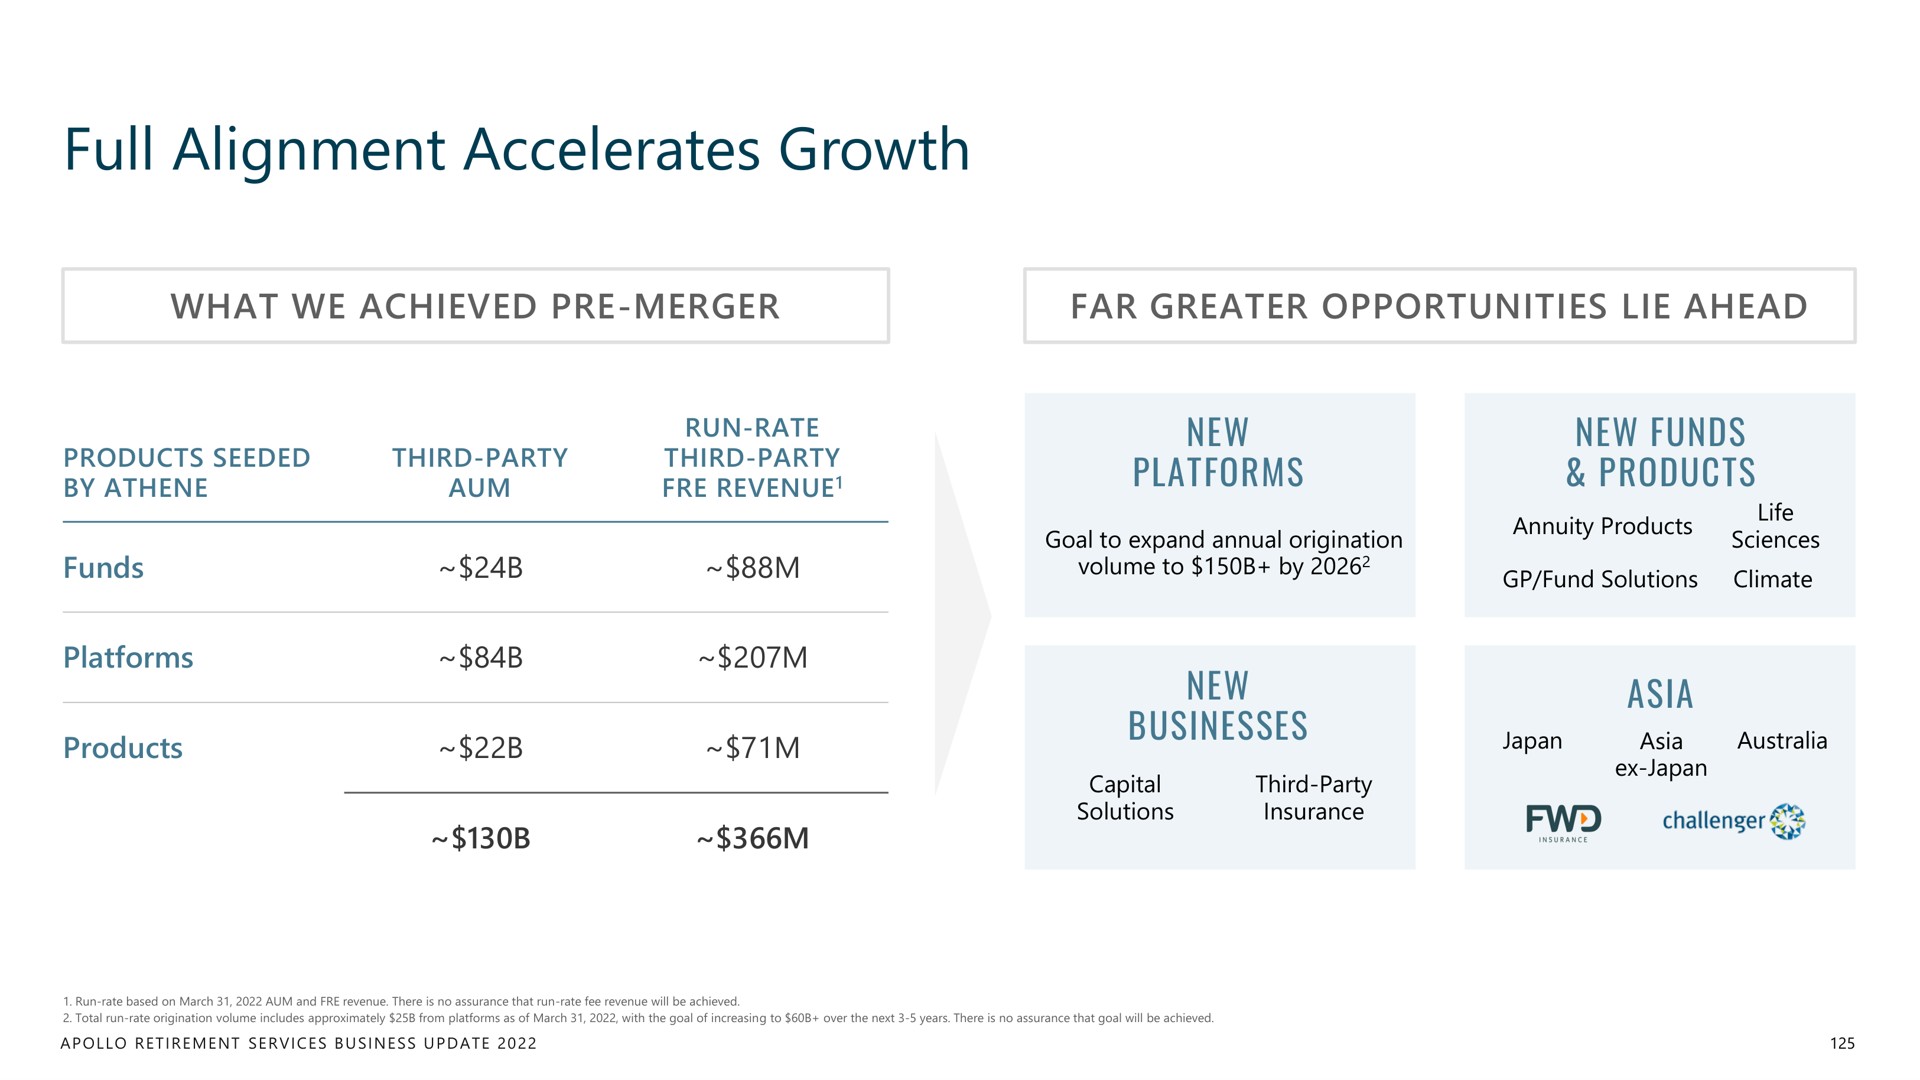 full alignment accelerates growth | Apollo Global Management